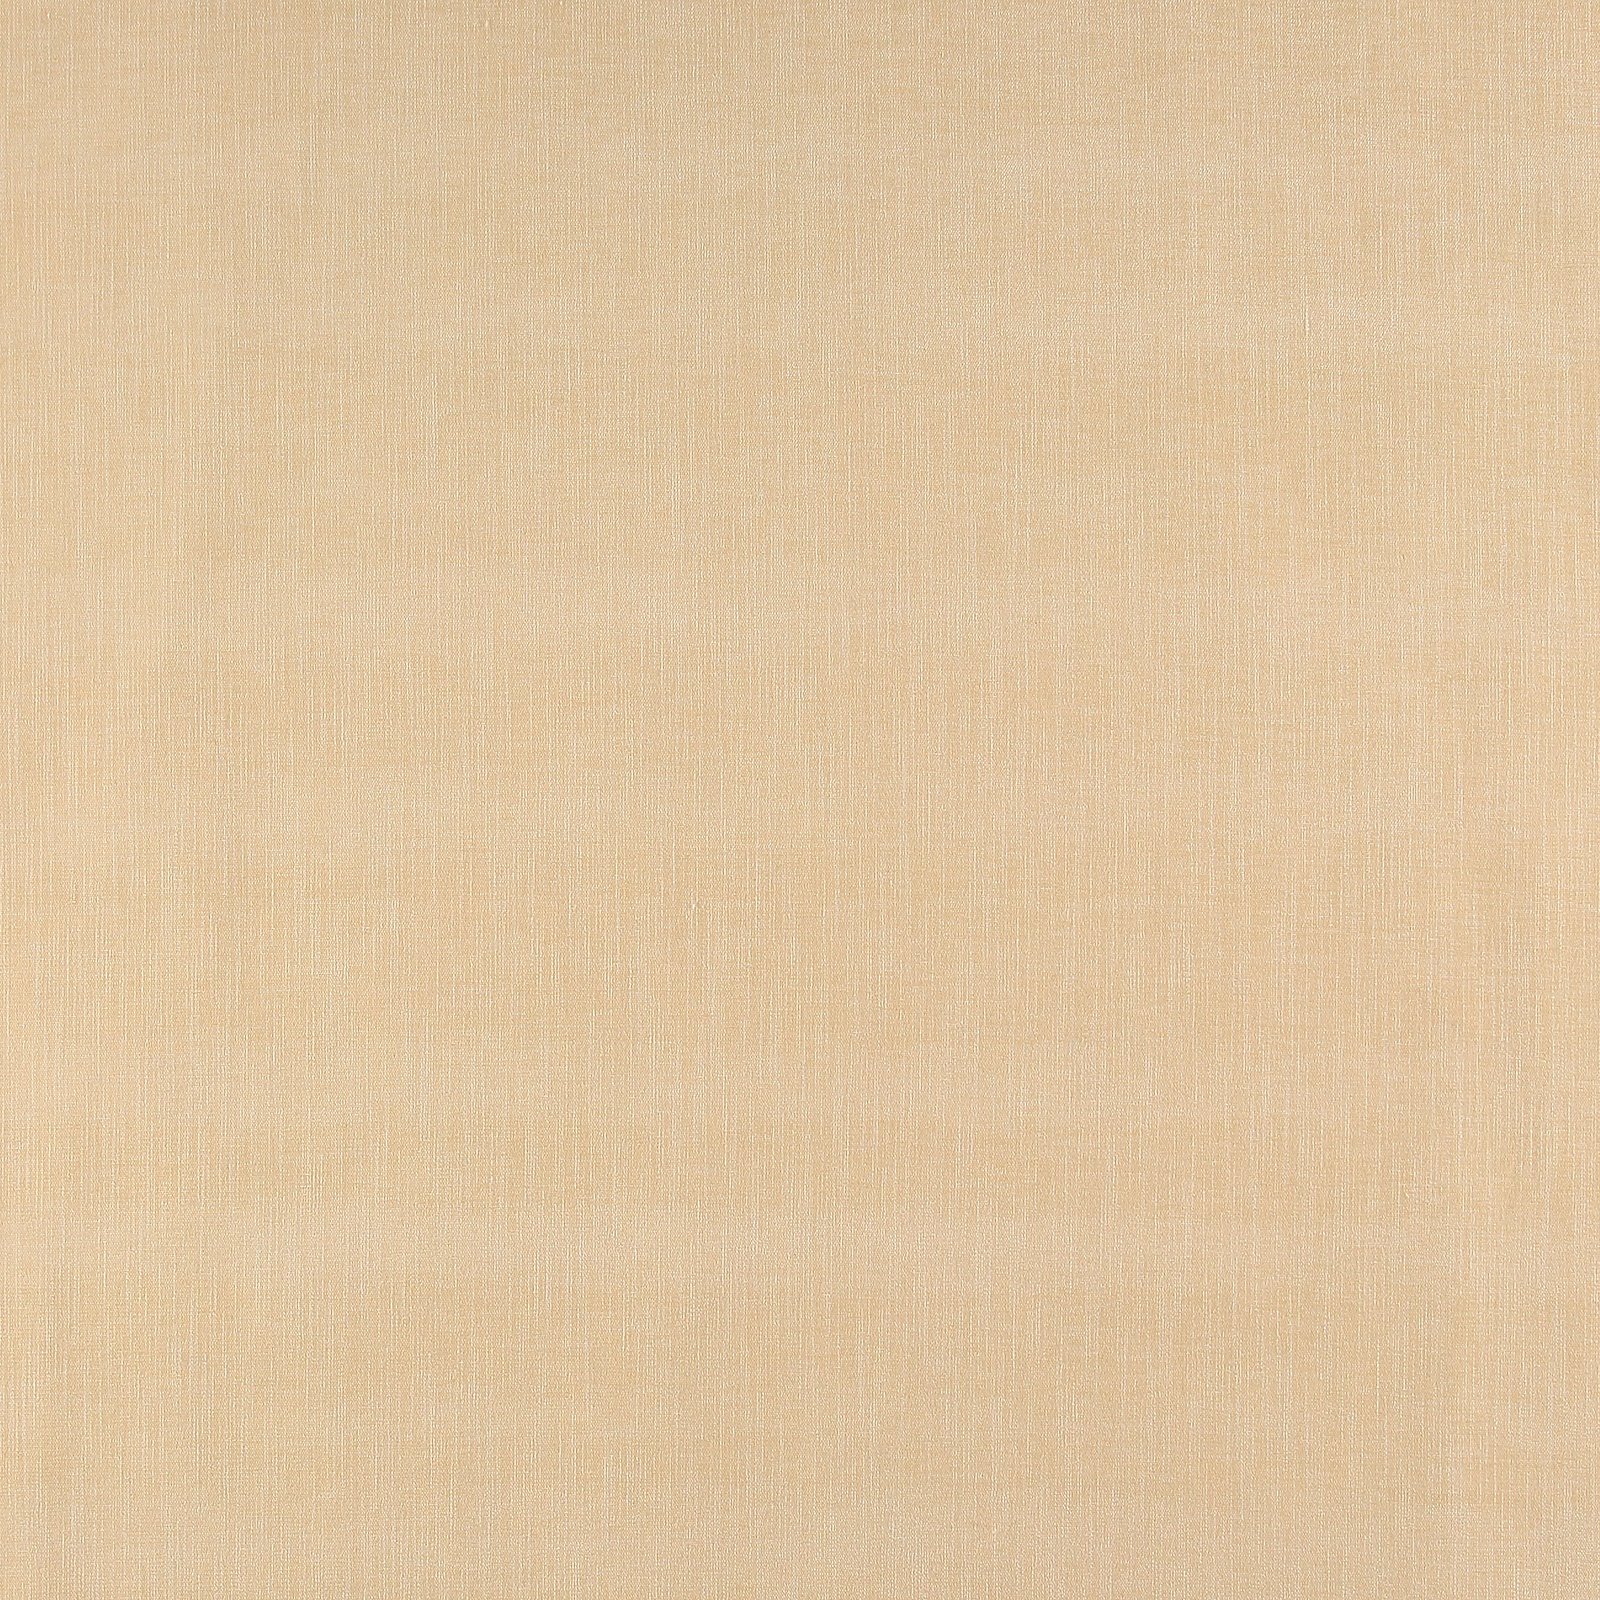 Upholstery chenille w structure vanilla 824181_pack_solid